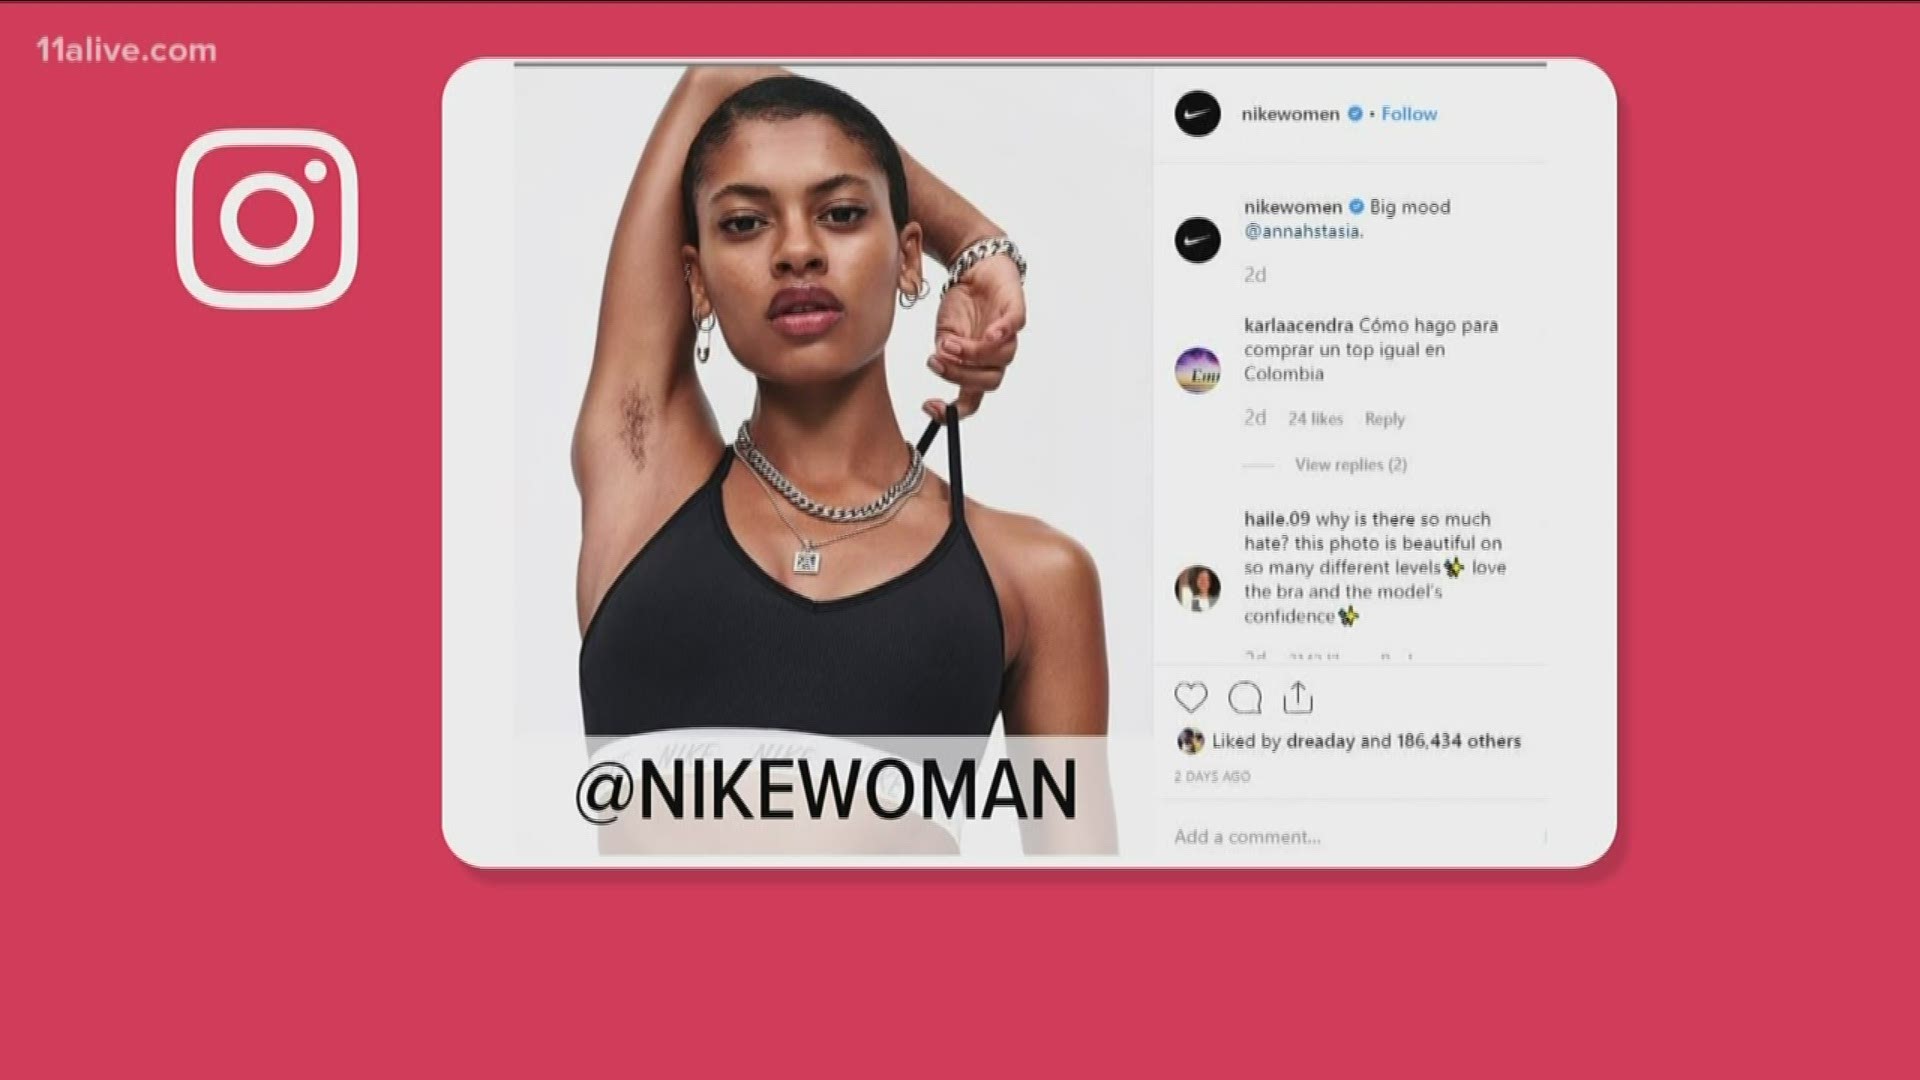 Nike ad showing woman's 'disgusting' armpit hair causes controversy